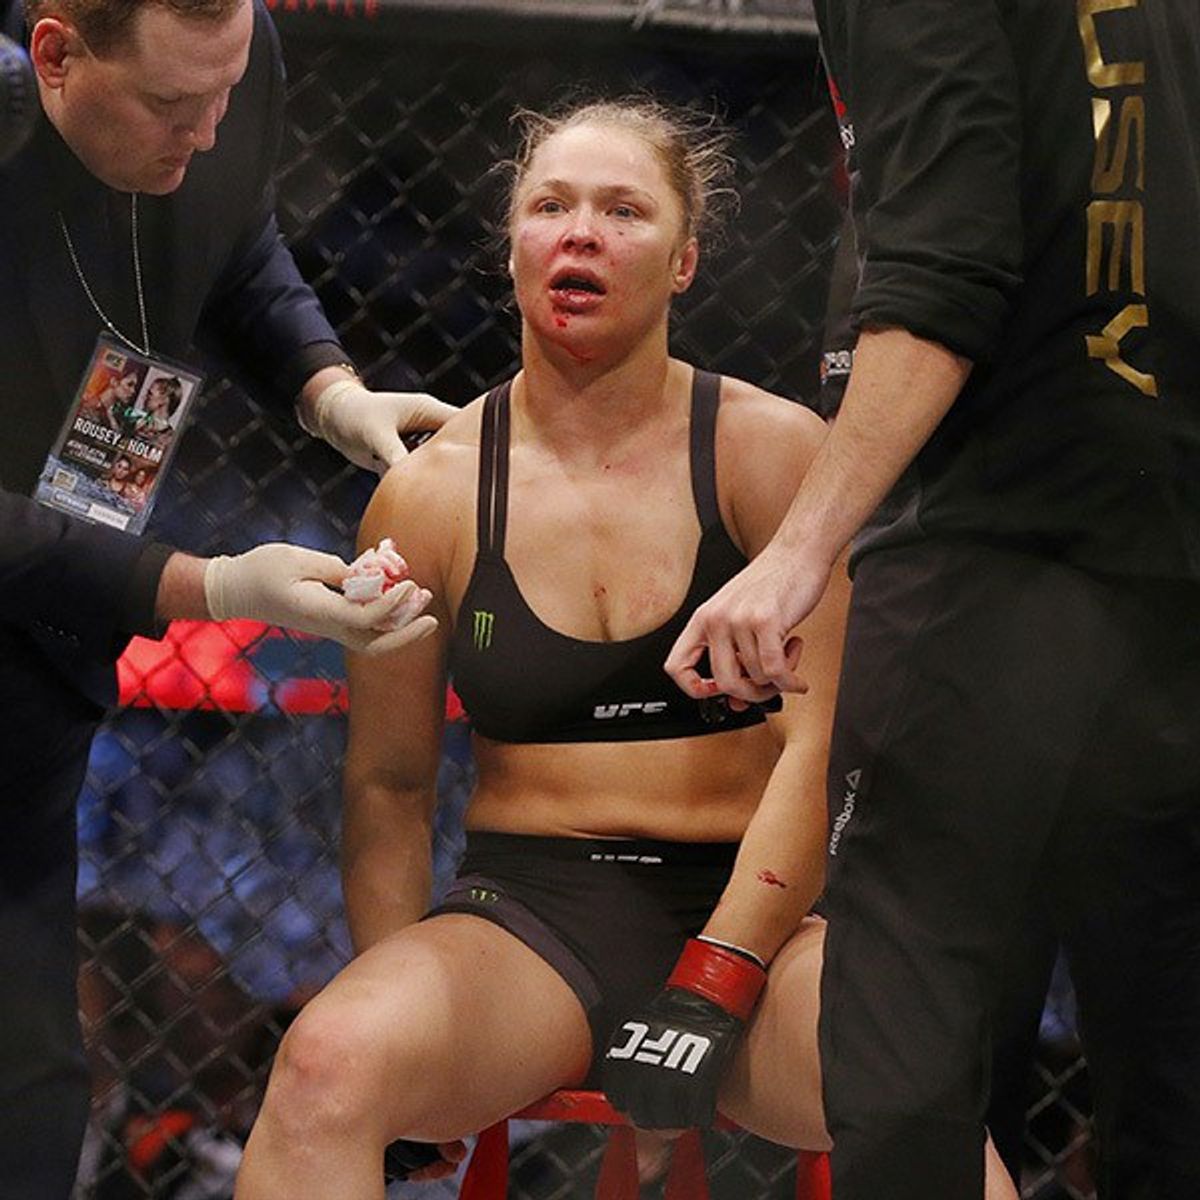 Will Rousey Get Rocked?